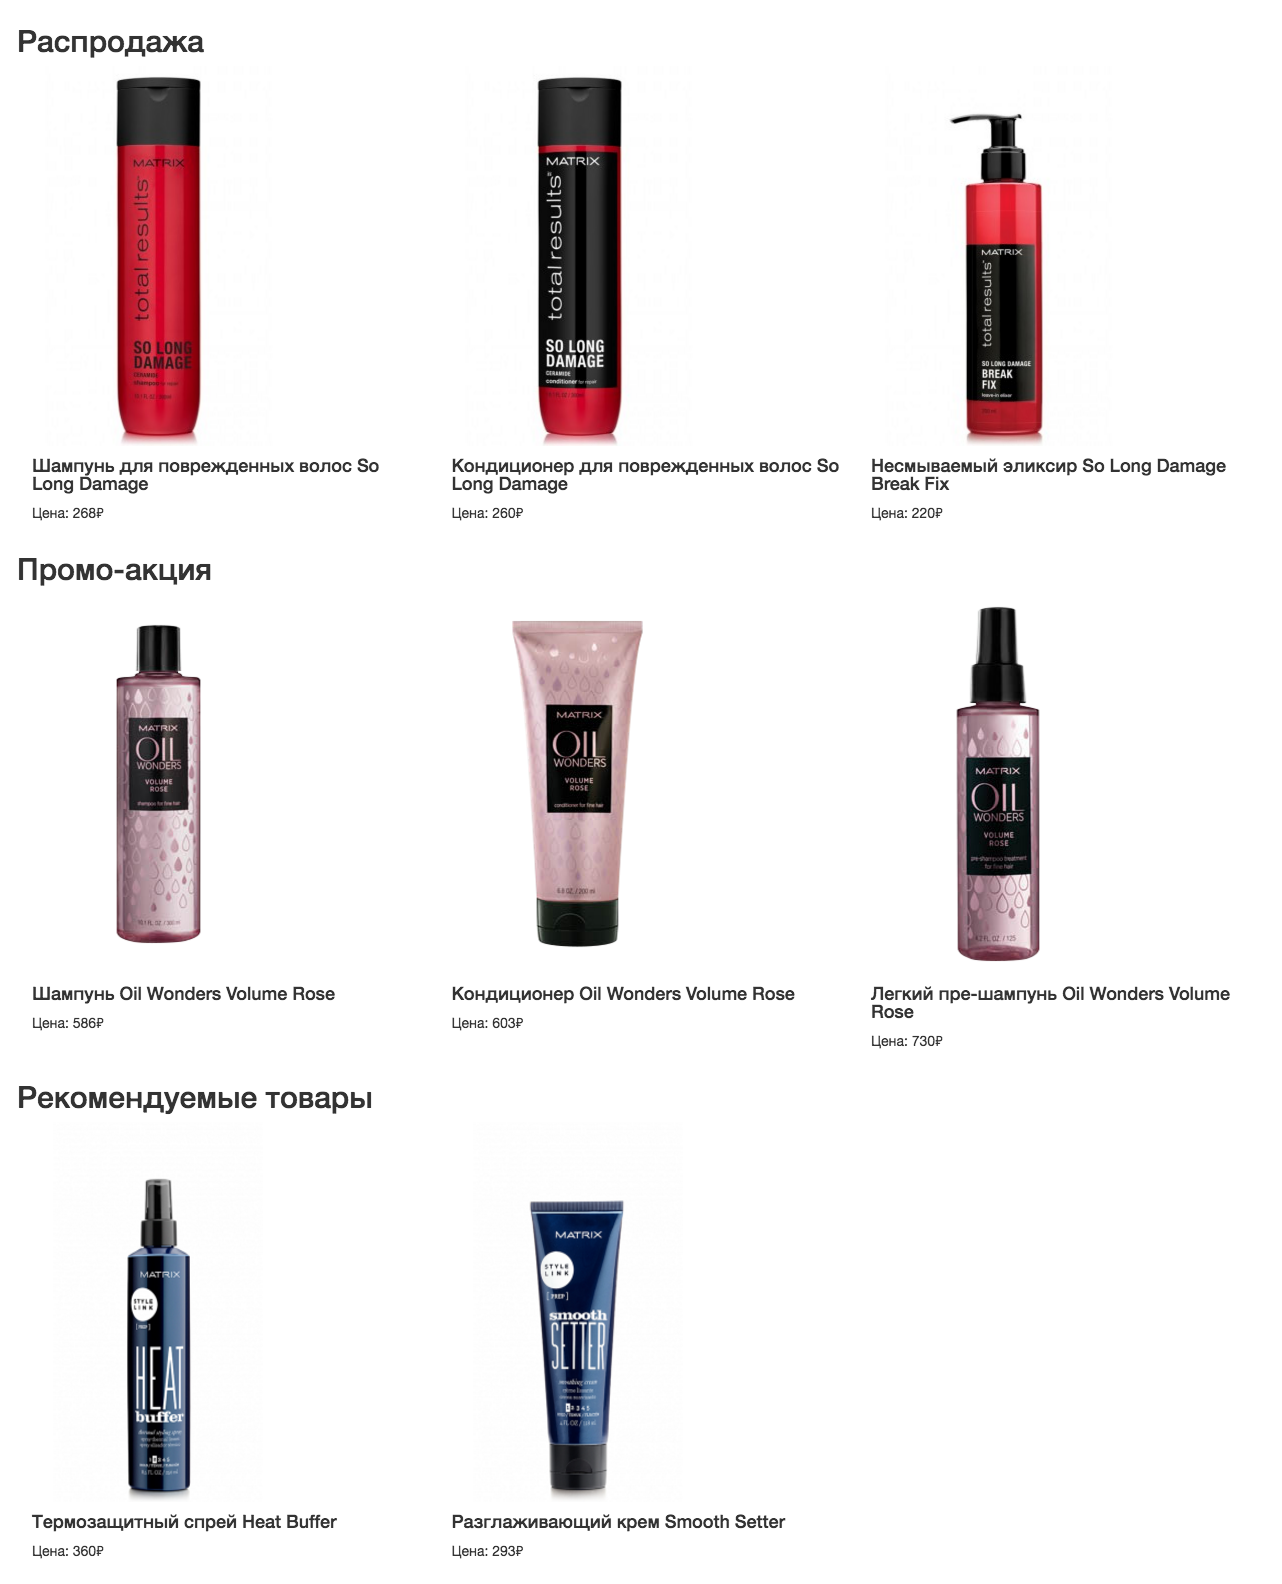 products_by_type.png